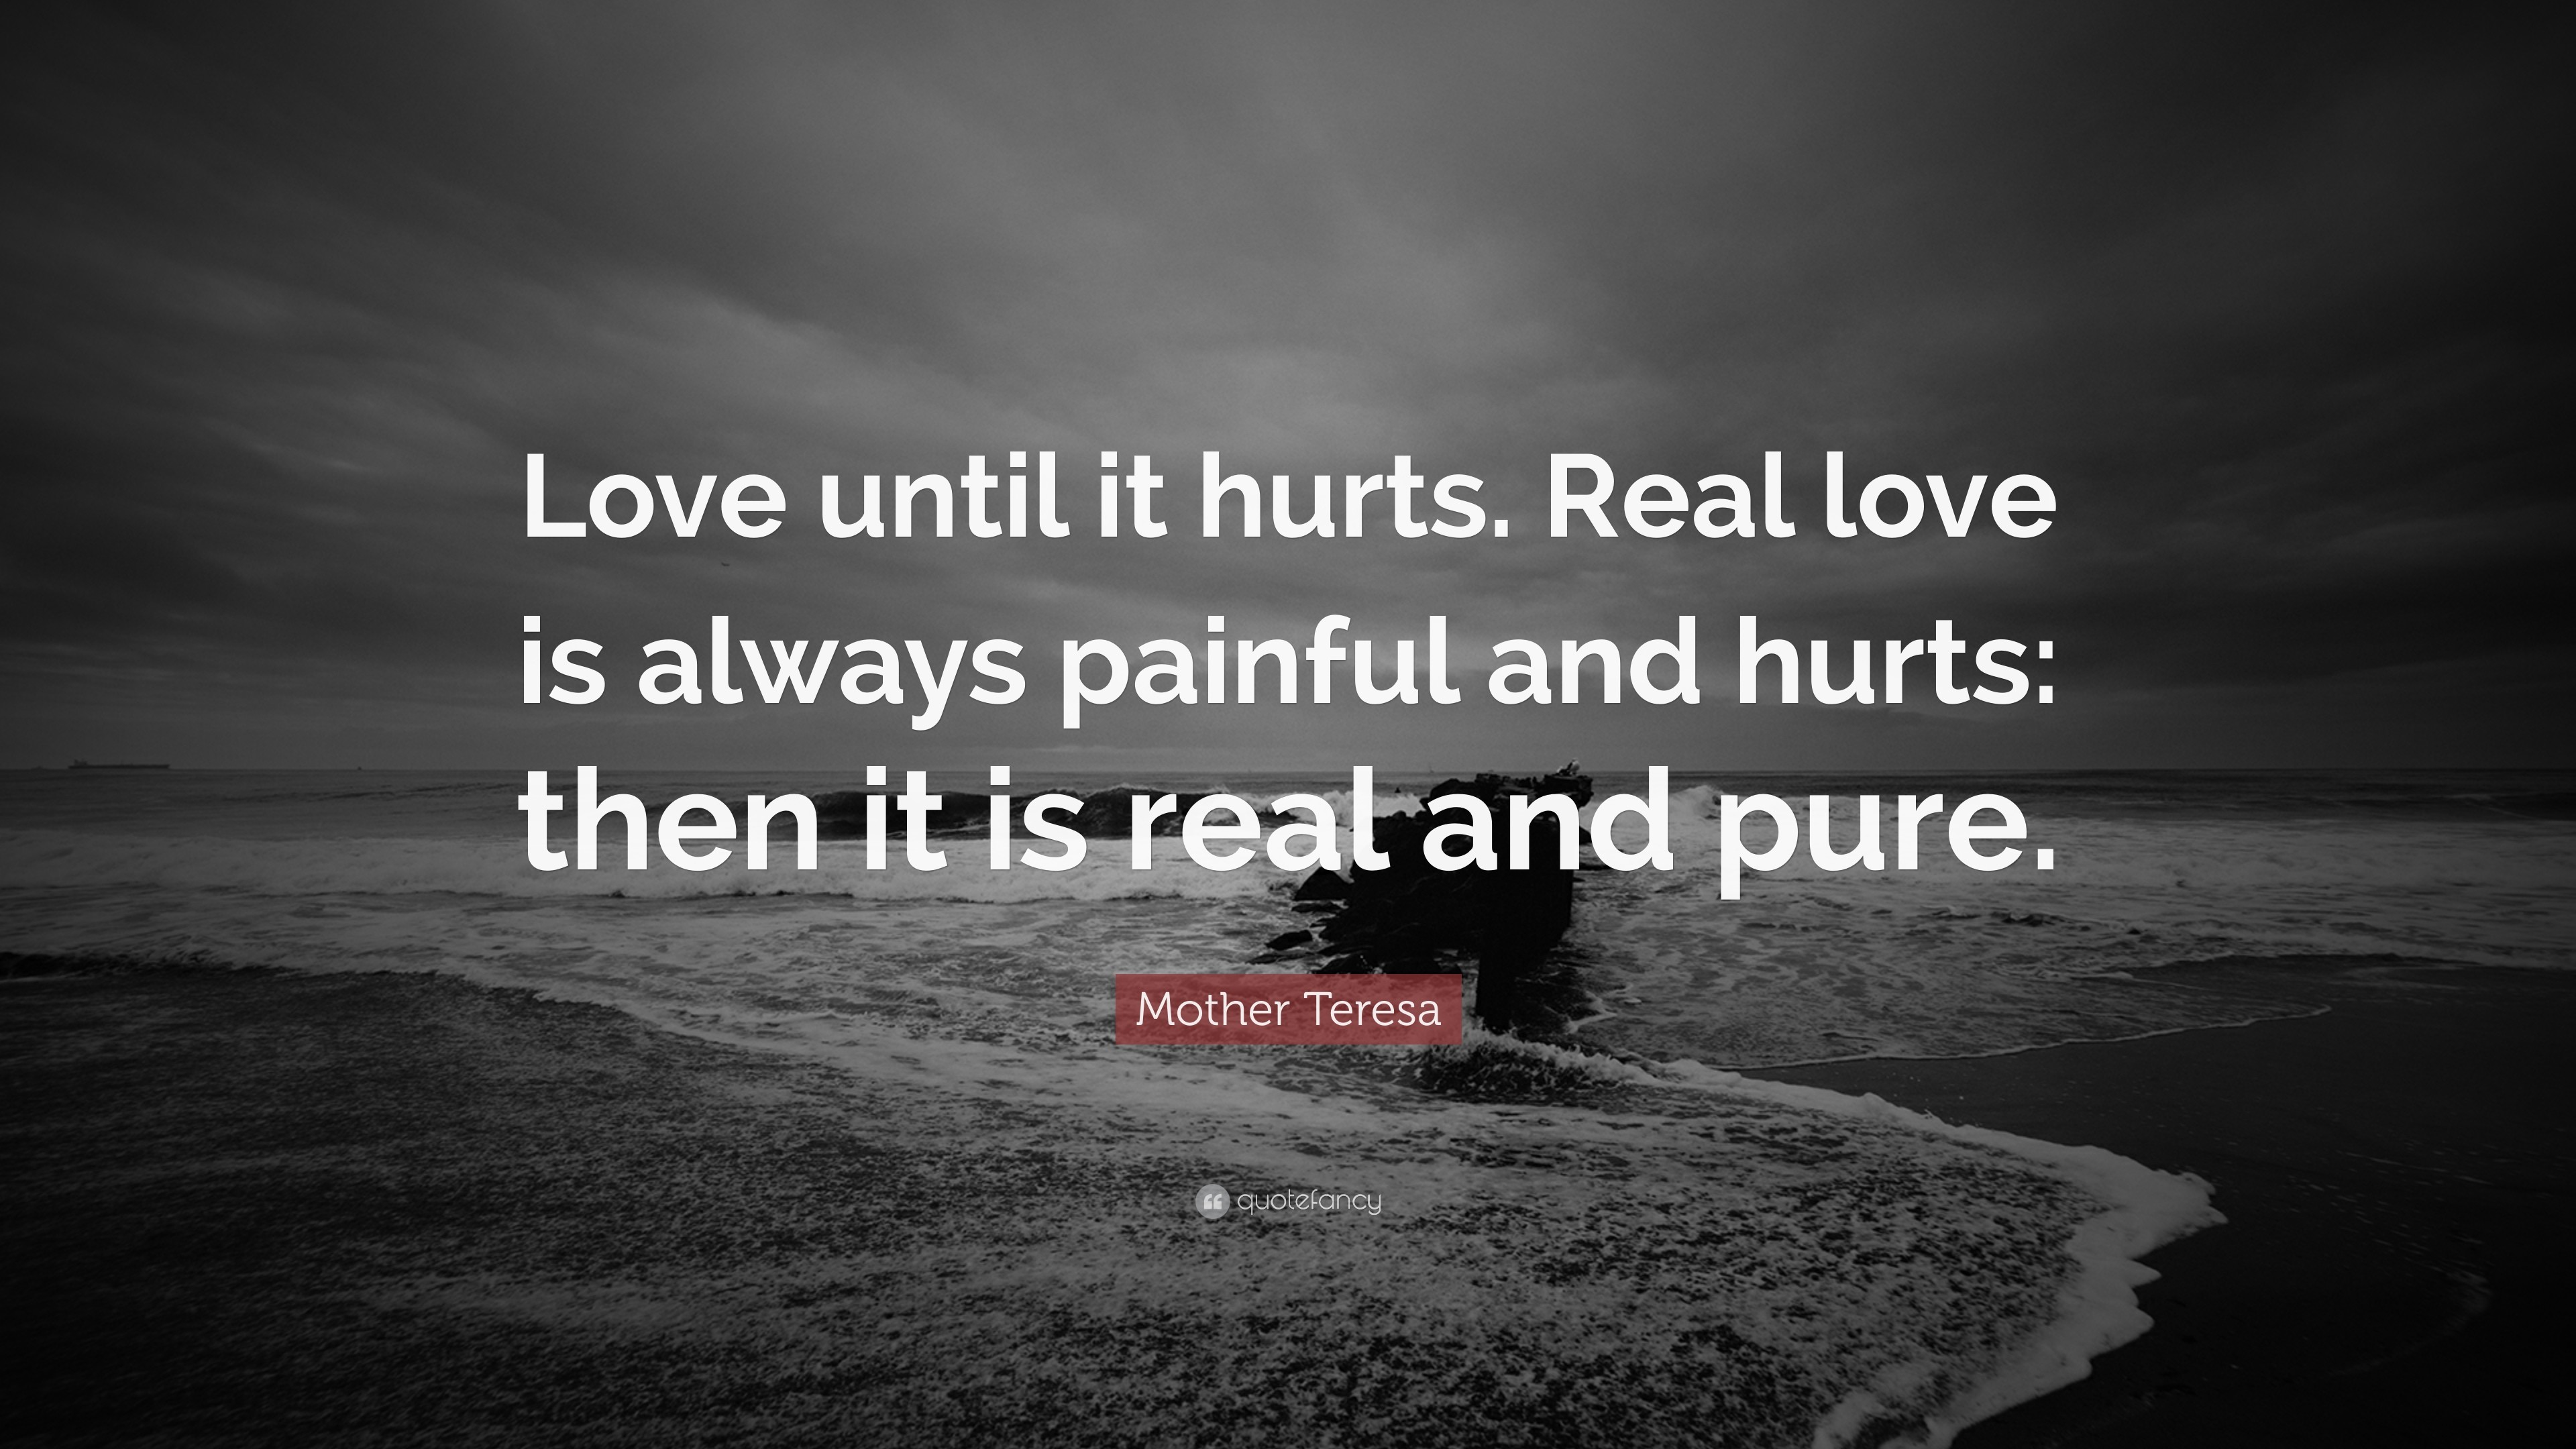 3840x2160 Mother Teresa Quote: “Love until it hurts. Real love is always painful and